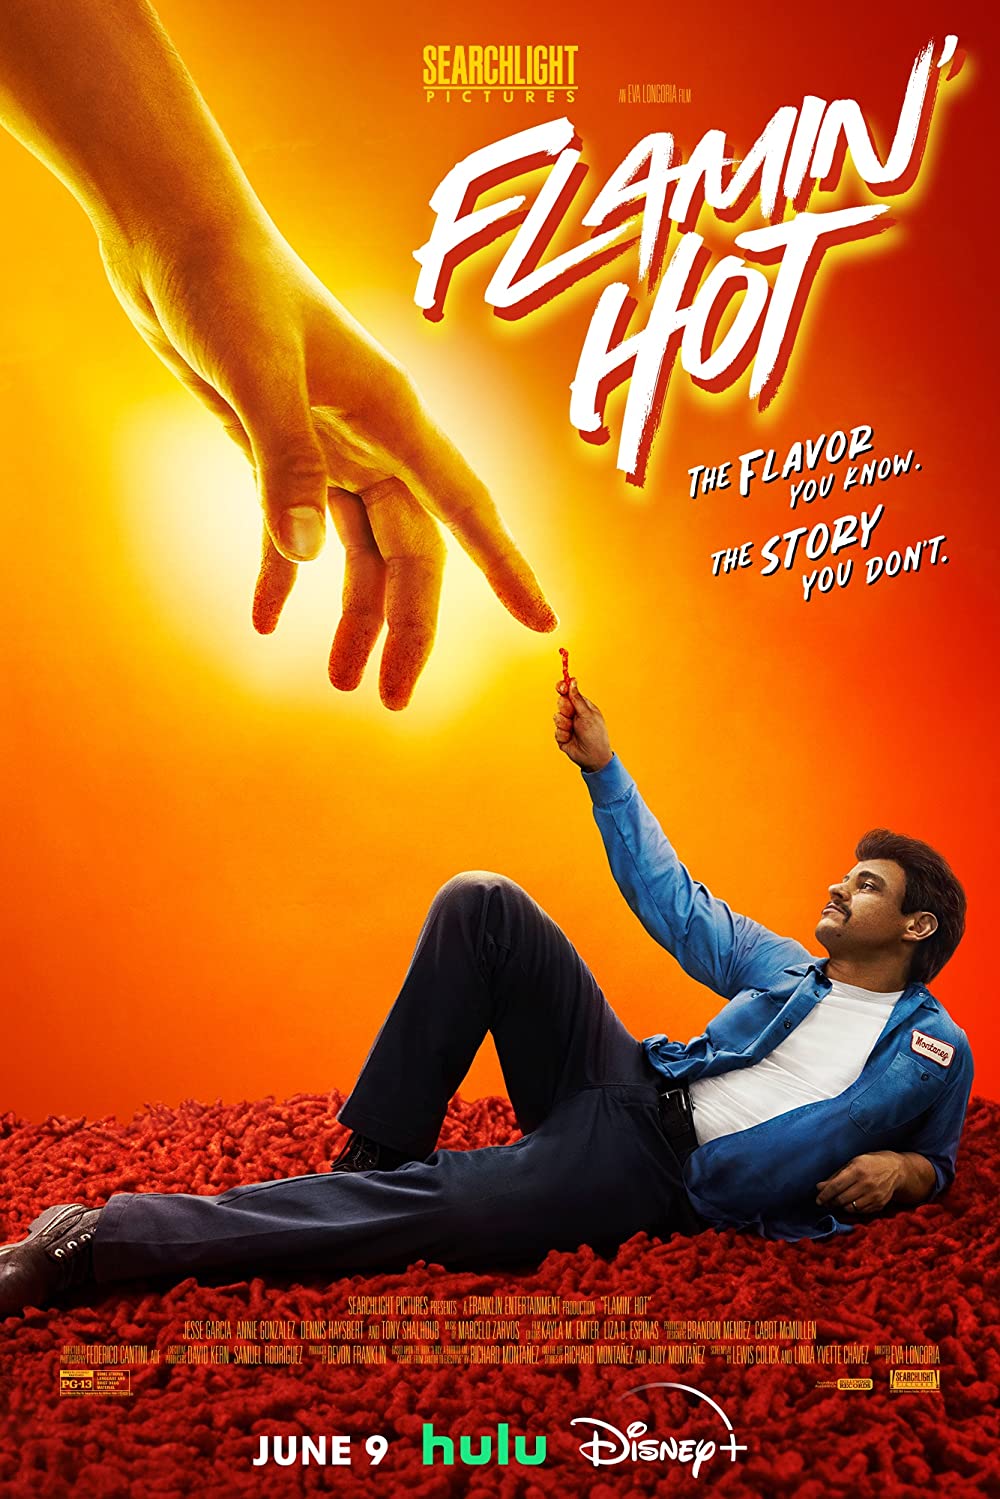 REVIEW Flamin Hot tells fictitious story of popular snack